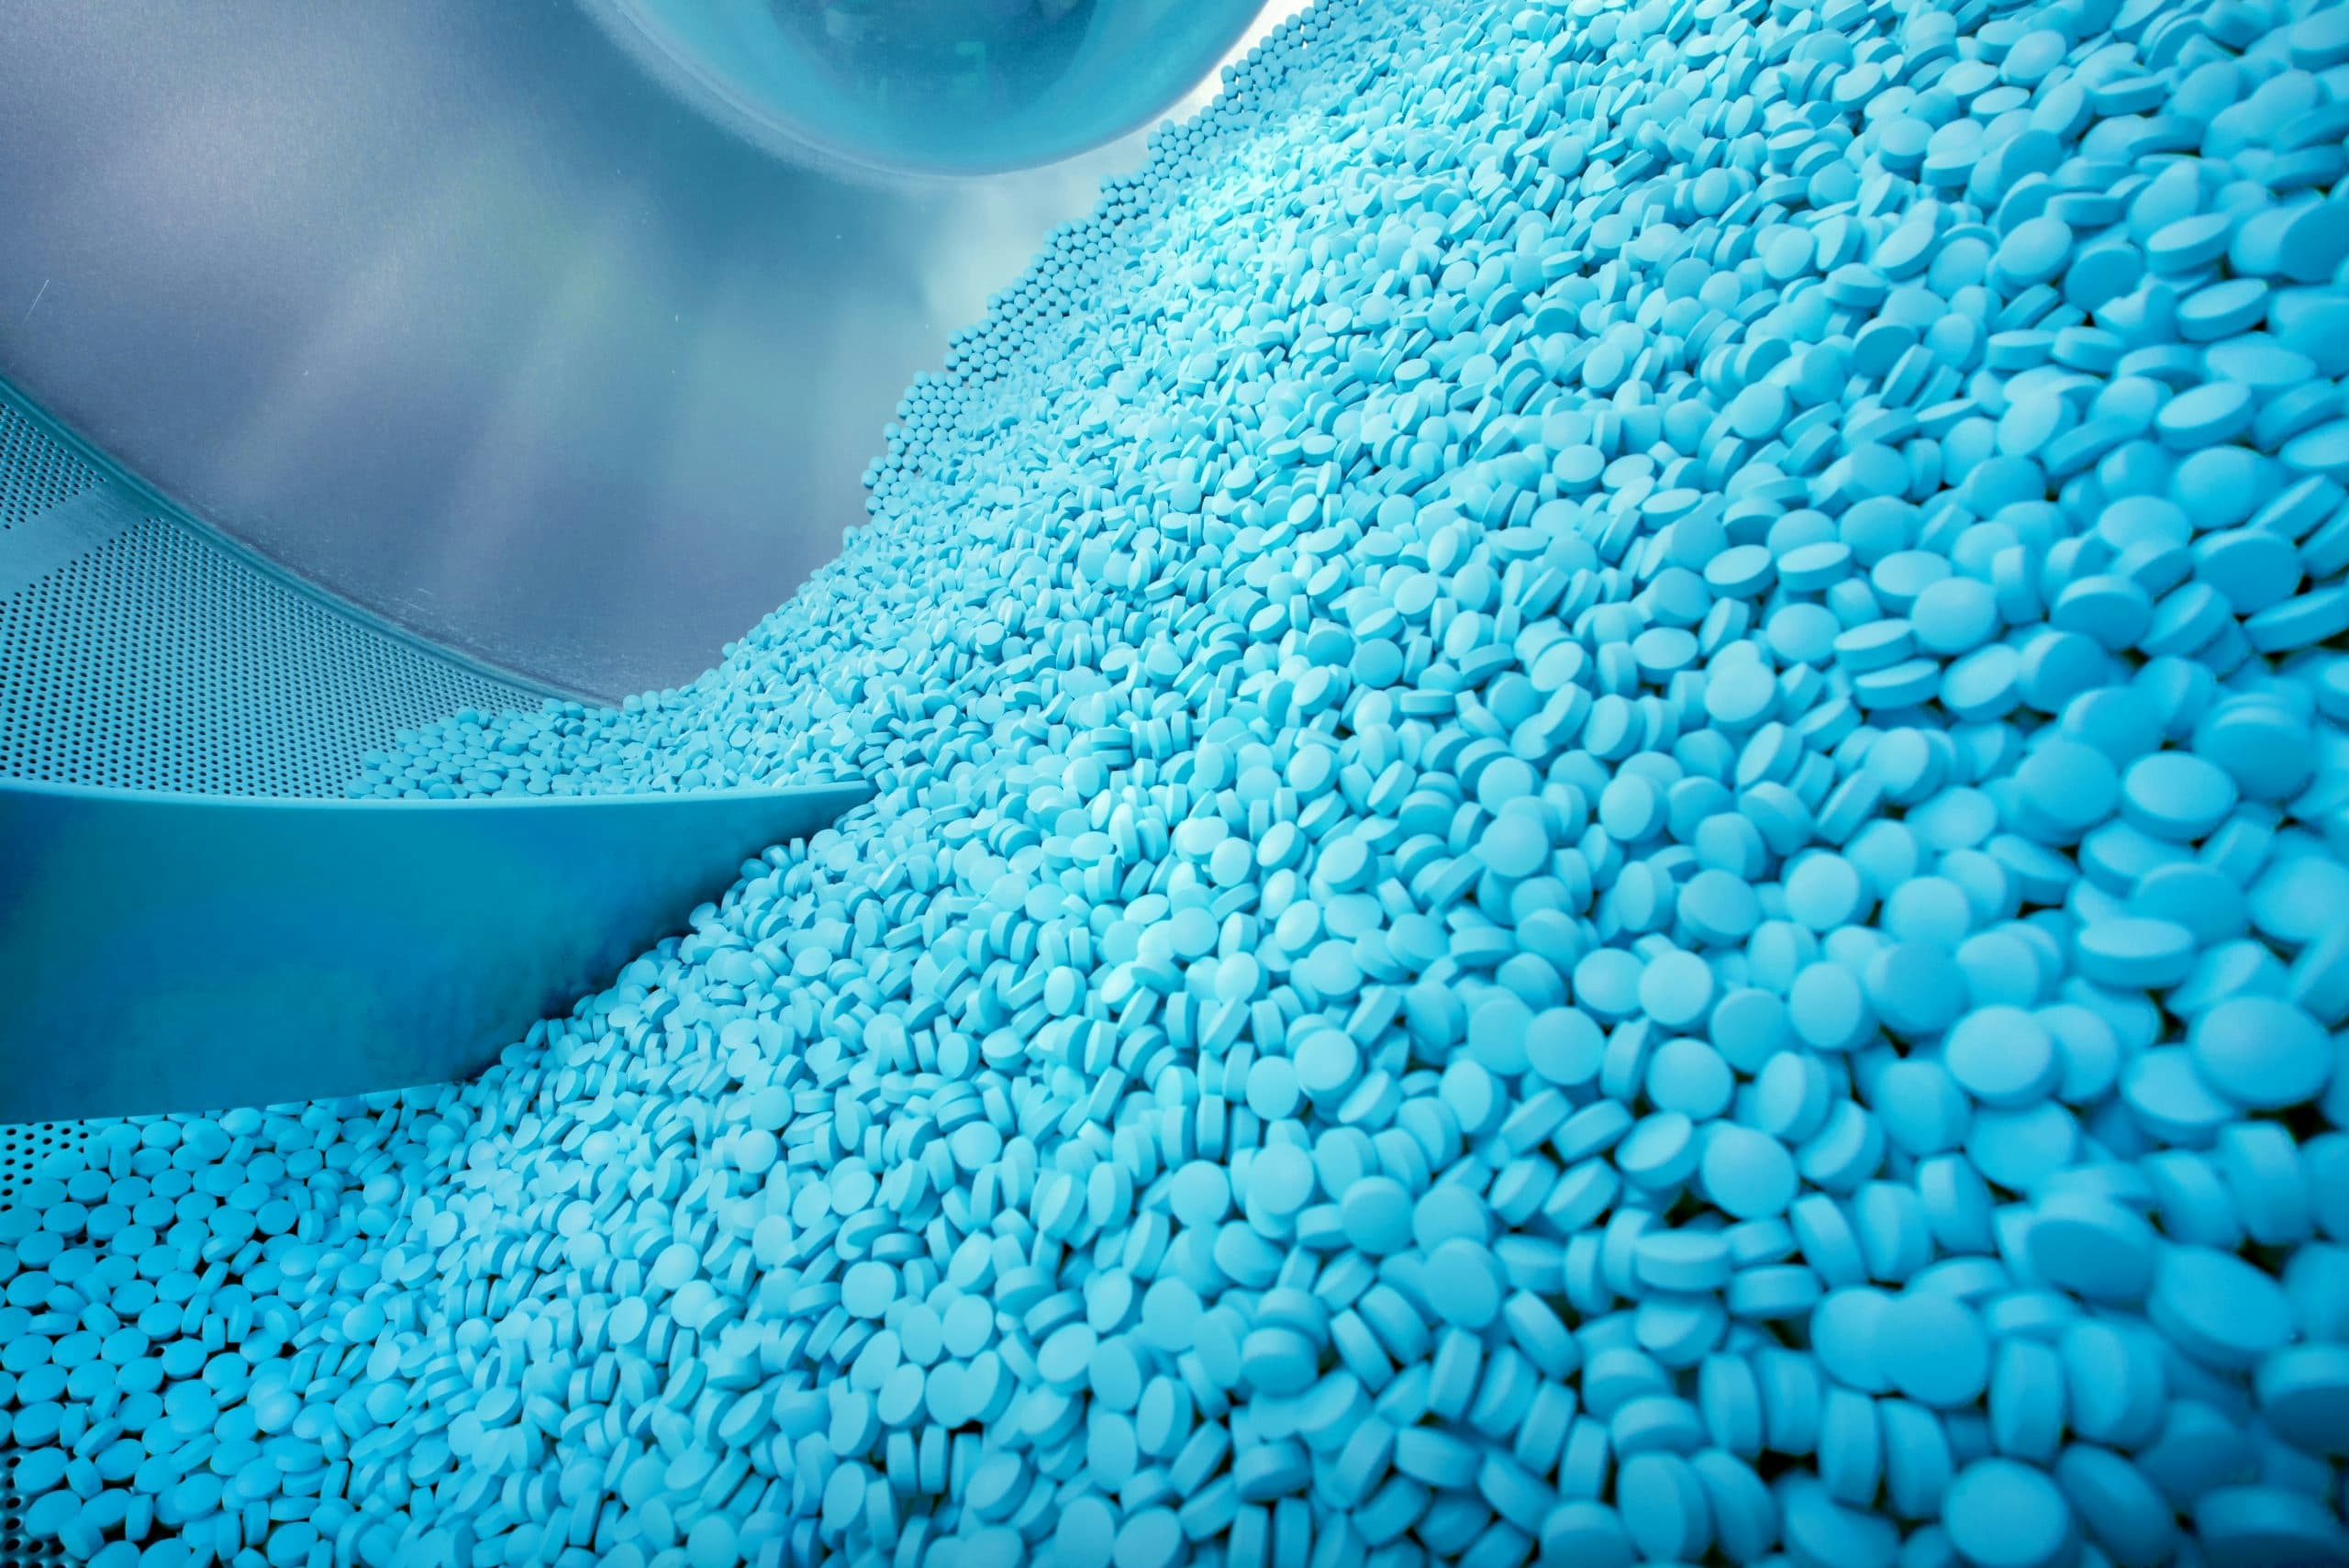 The sweet world of pharmaceutical tablets - The trifecta for achieving coating uniformity